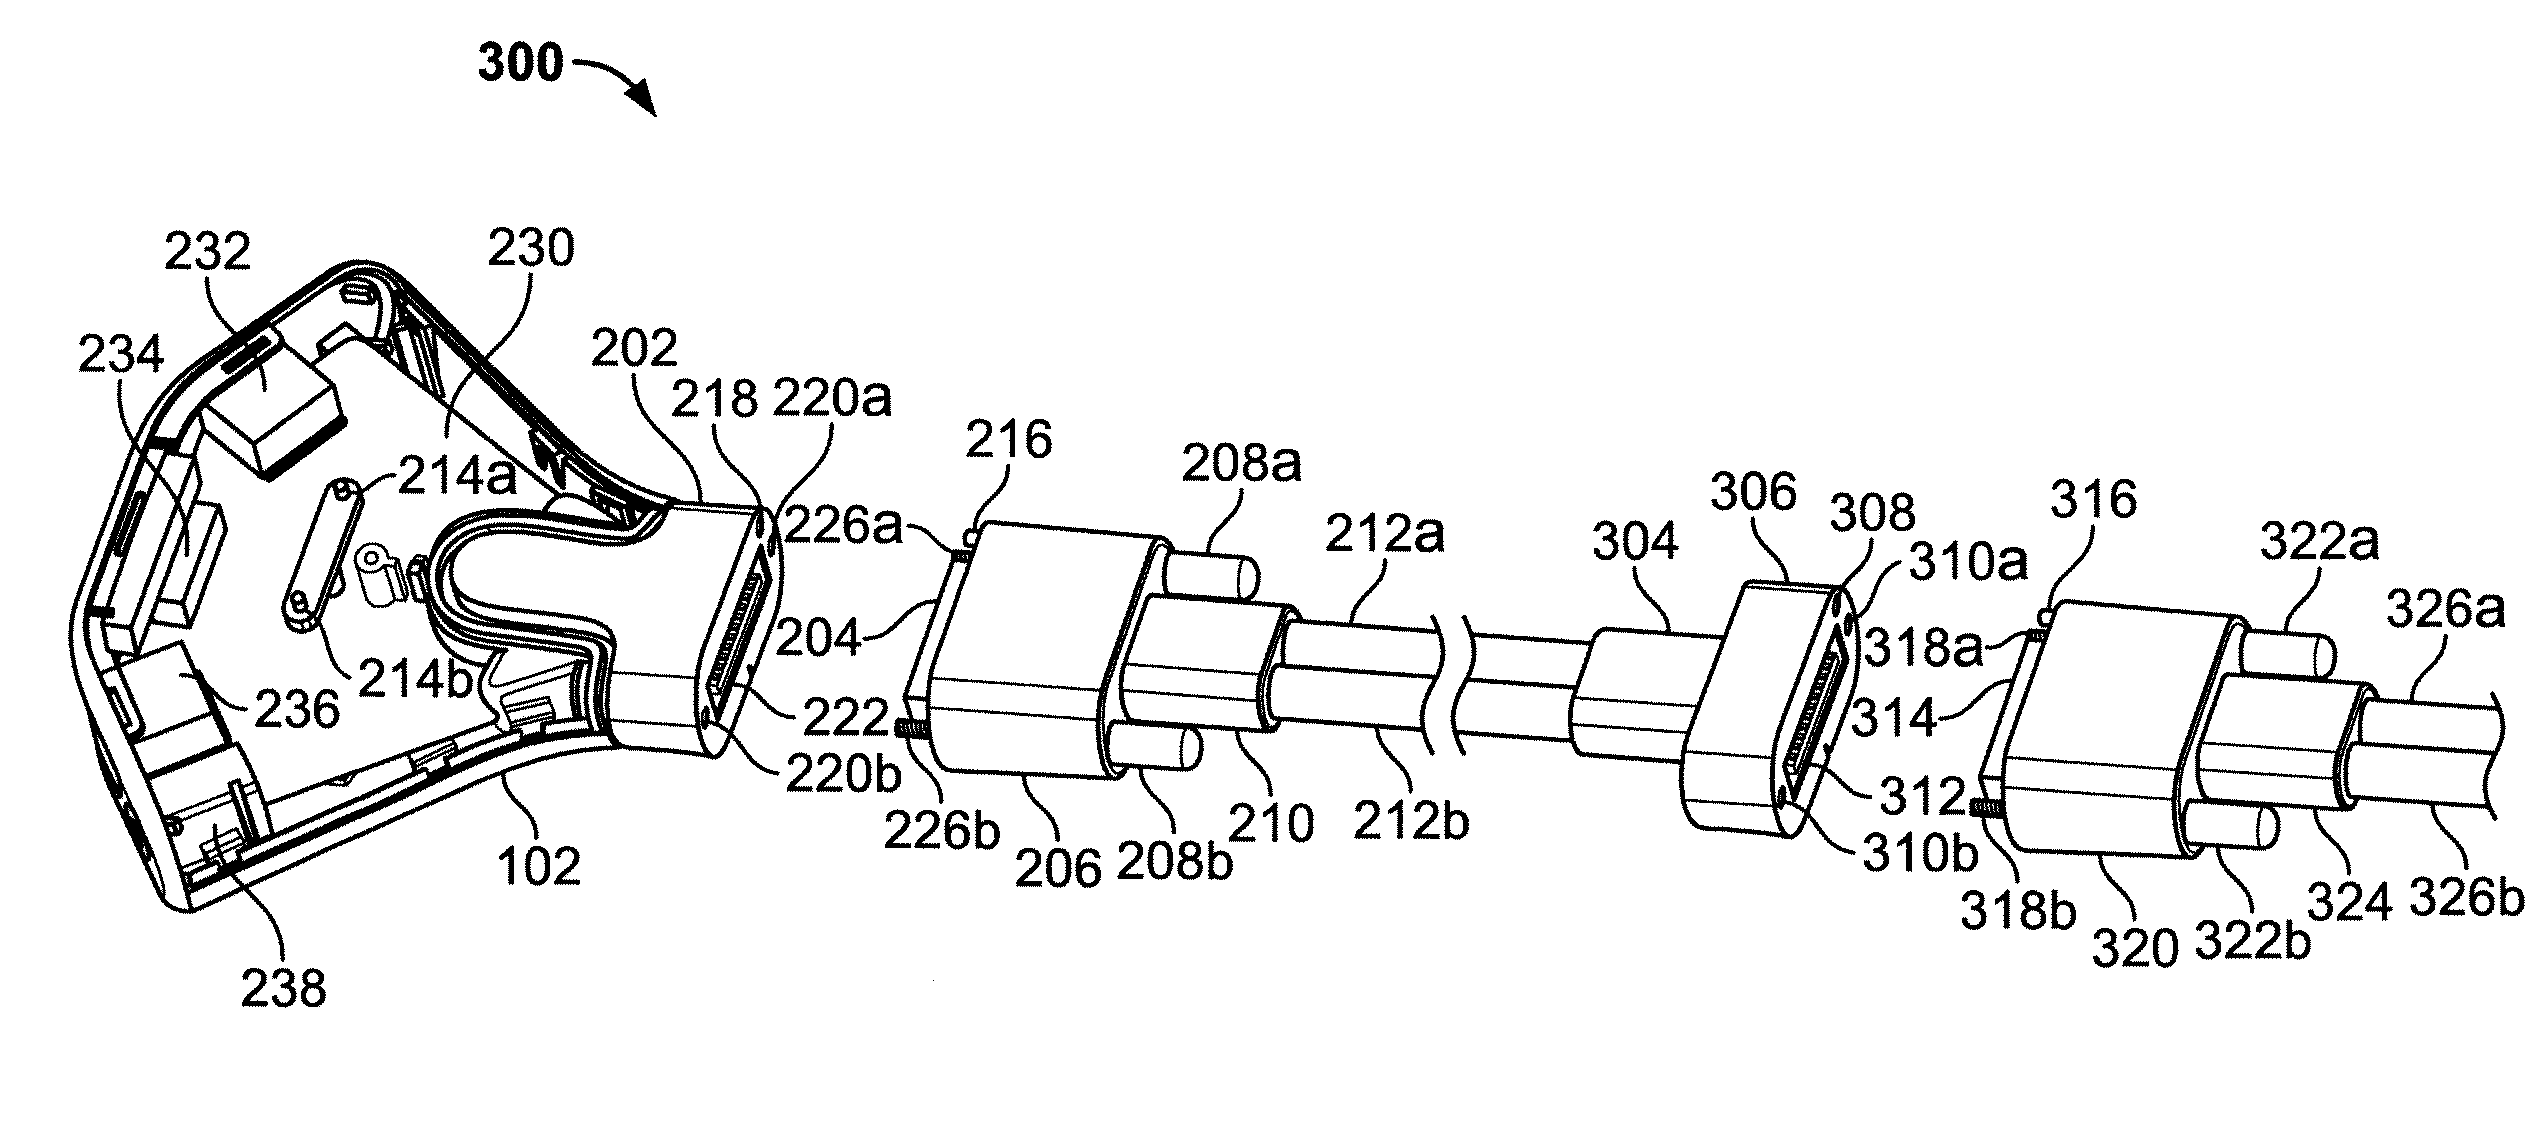 Apparatus for managing multiple computers with a cartridge connector